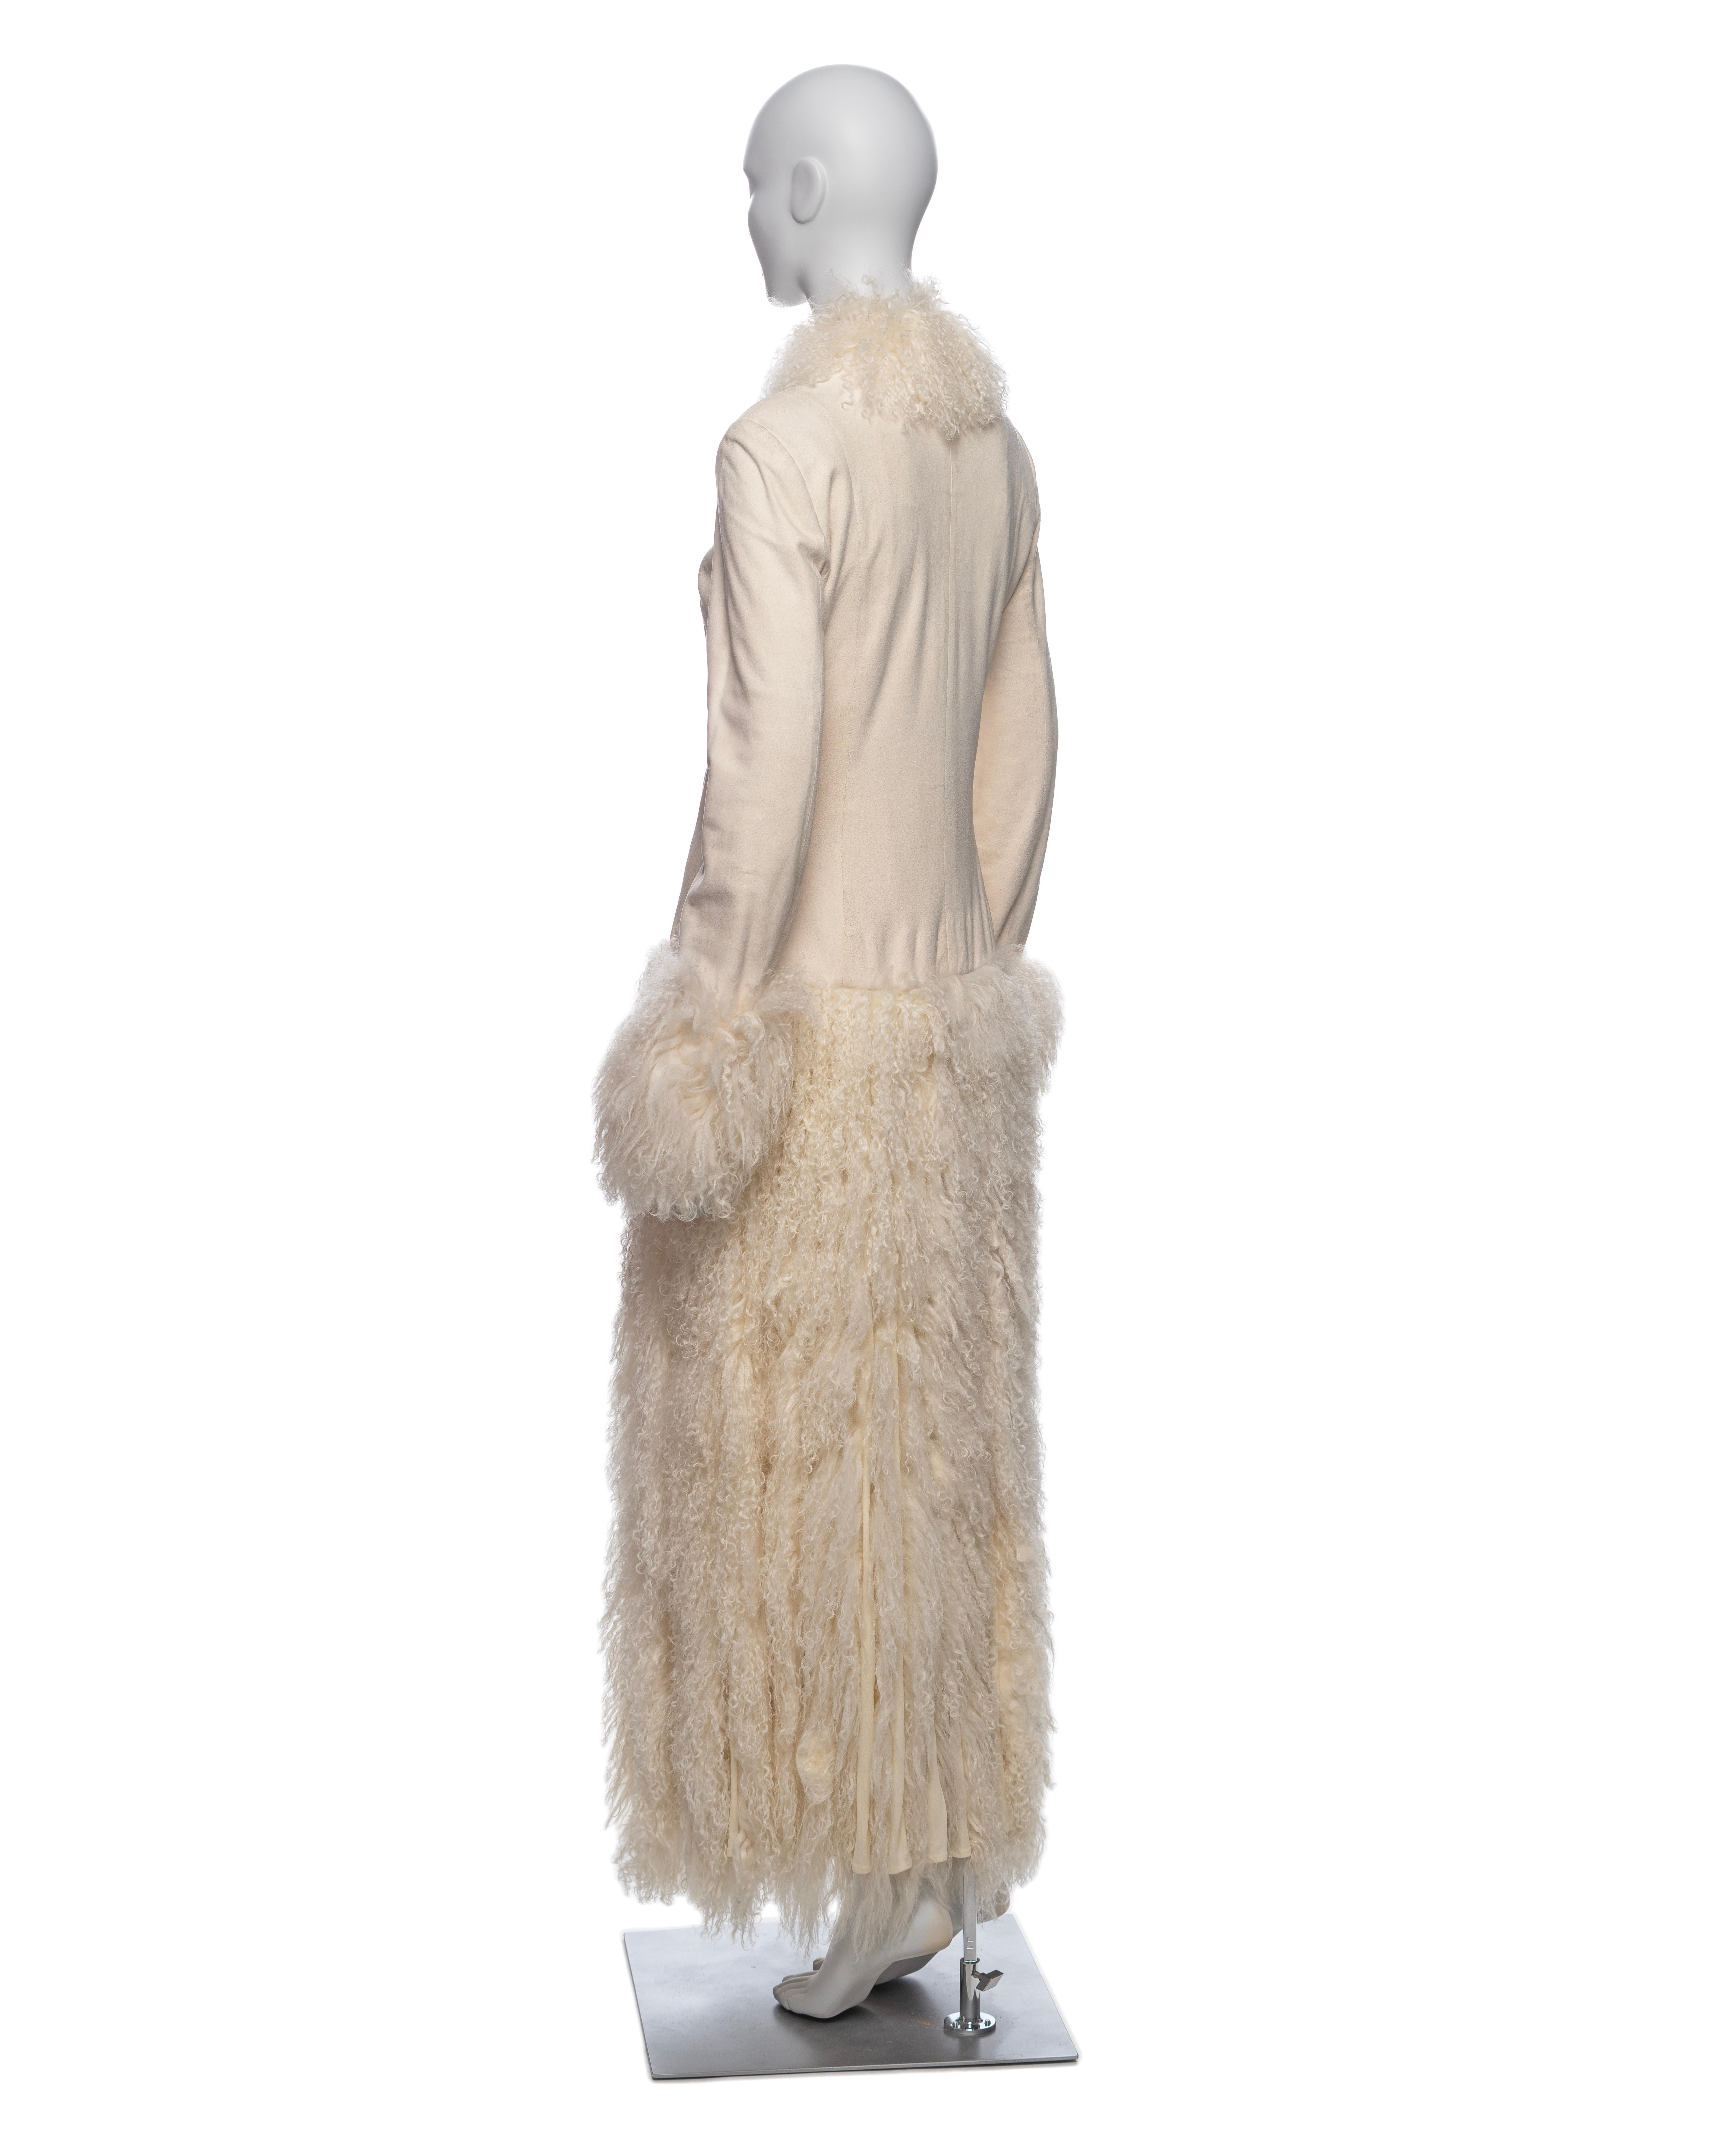 Jean Paul Gaultier White Mongolian Lamb Fur and Leather Coat Dress, FW 2006 For Sale 10